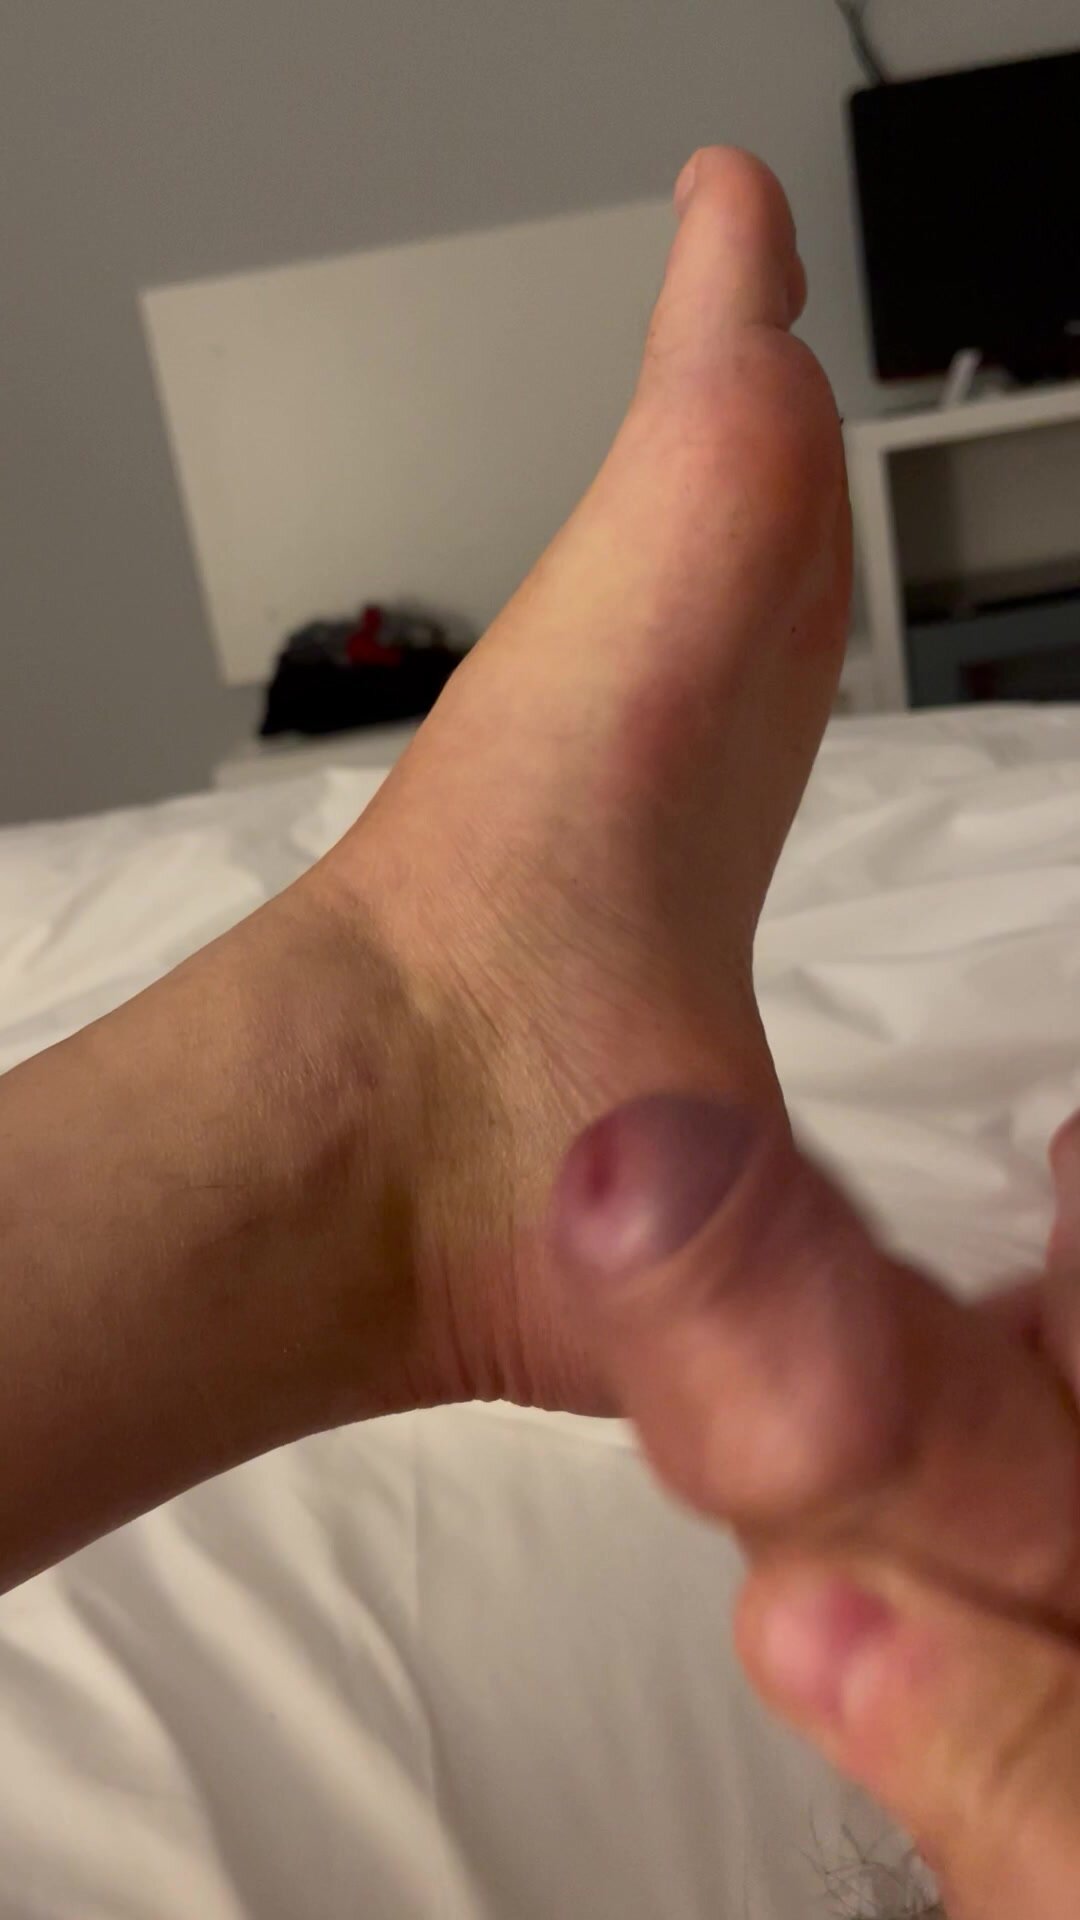 My feet and dick - video 2